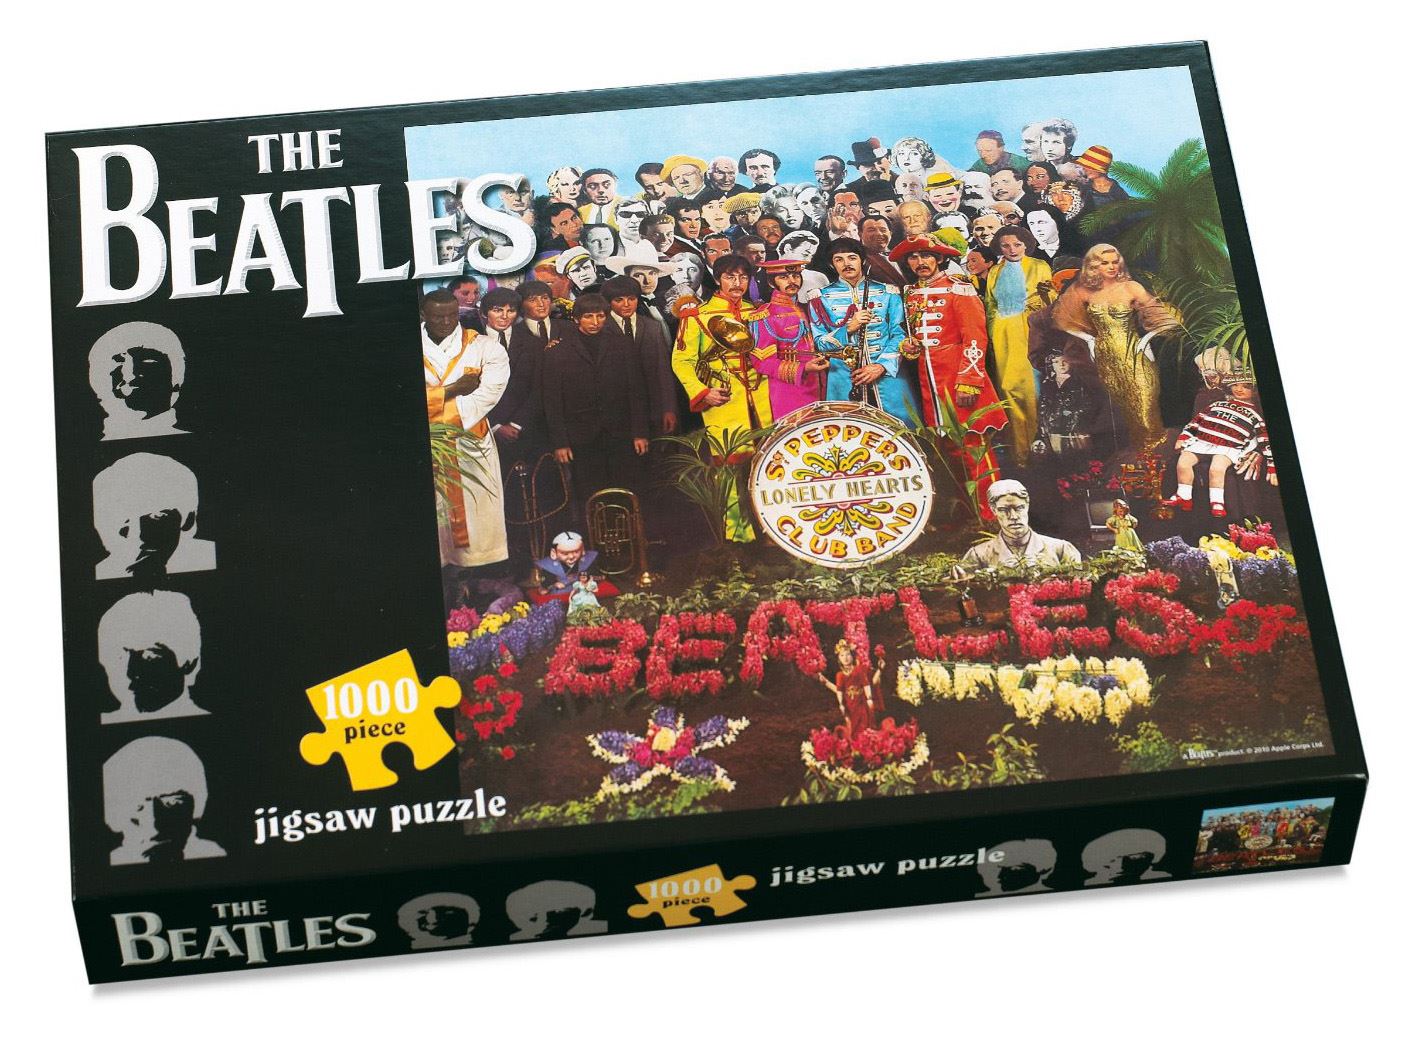 The Beatles Sergeant Pepper Jigsaw Puzzle (1000 Pieces)